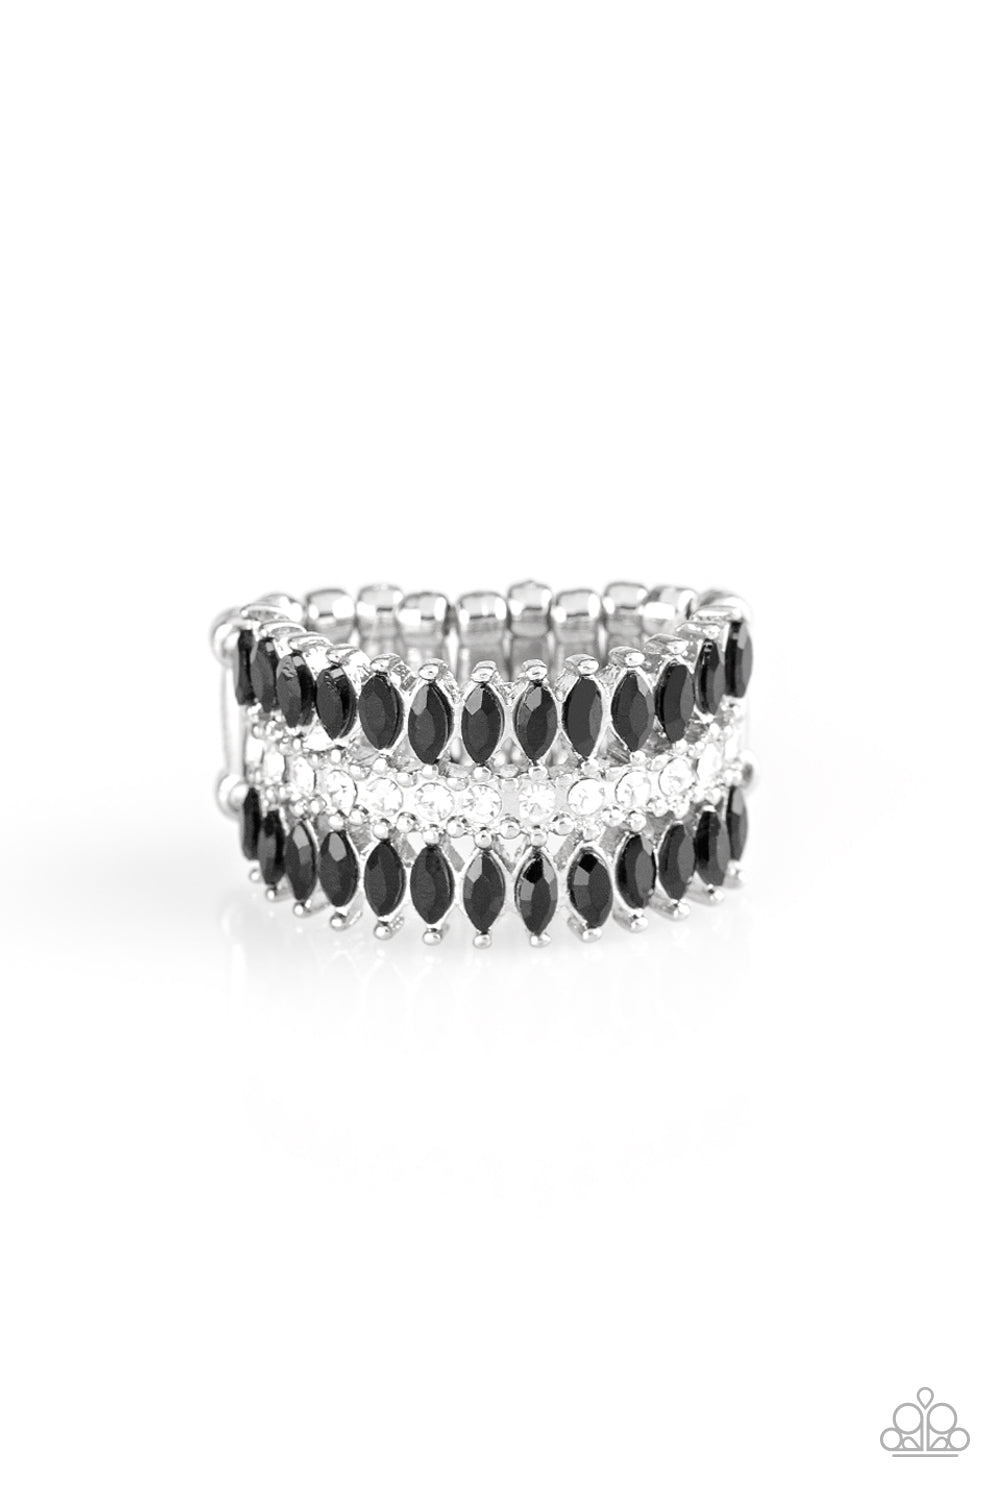 Featuring refined marquise cuts, glittery black rhinestones flare from a center of glassy white rhinestones, creating a regal band across the finger. Features a stretchy band for a flexible fit.